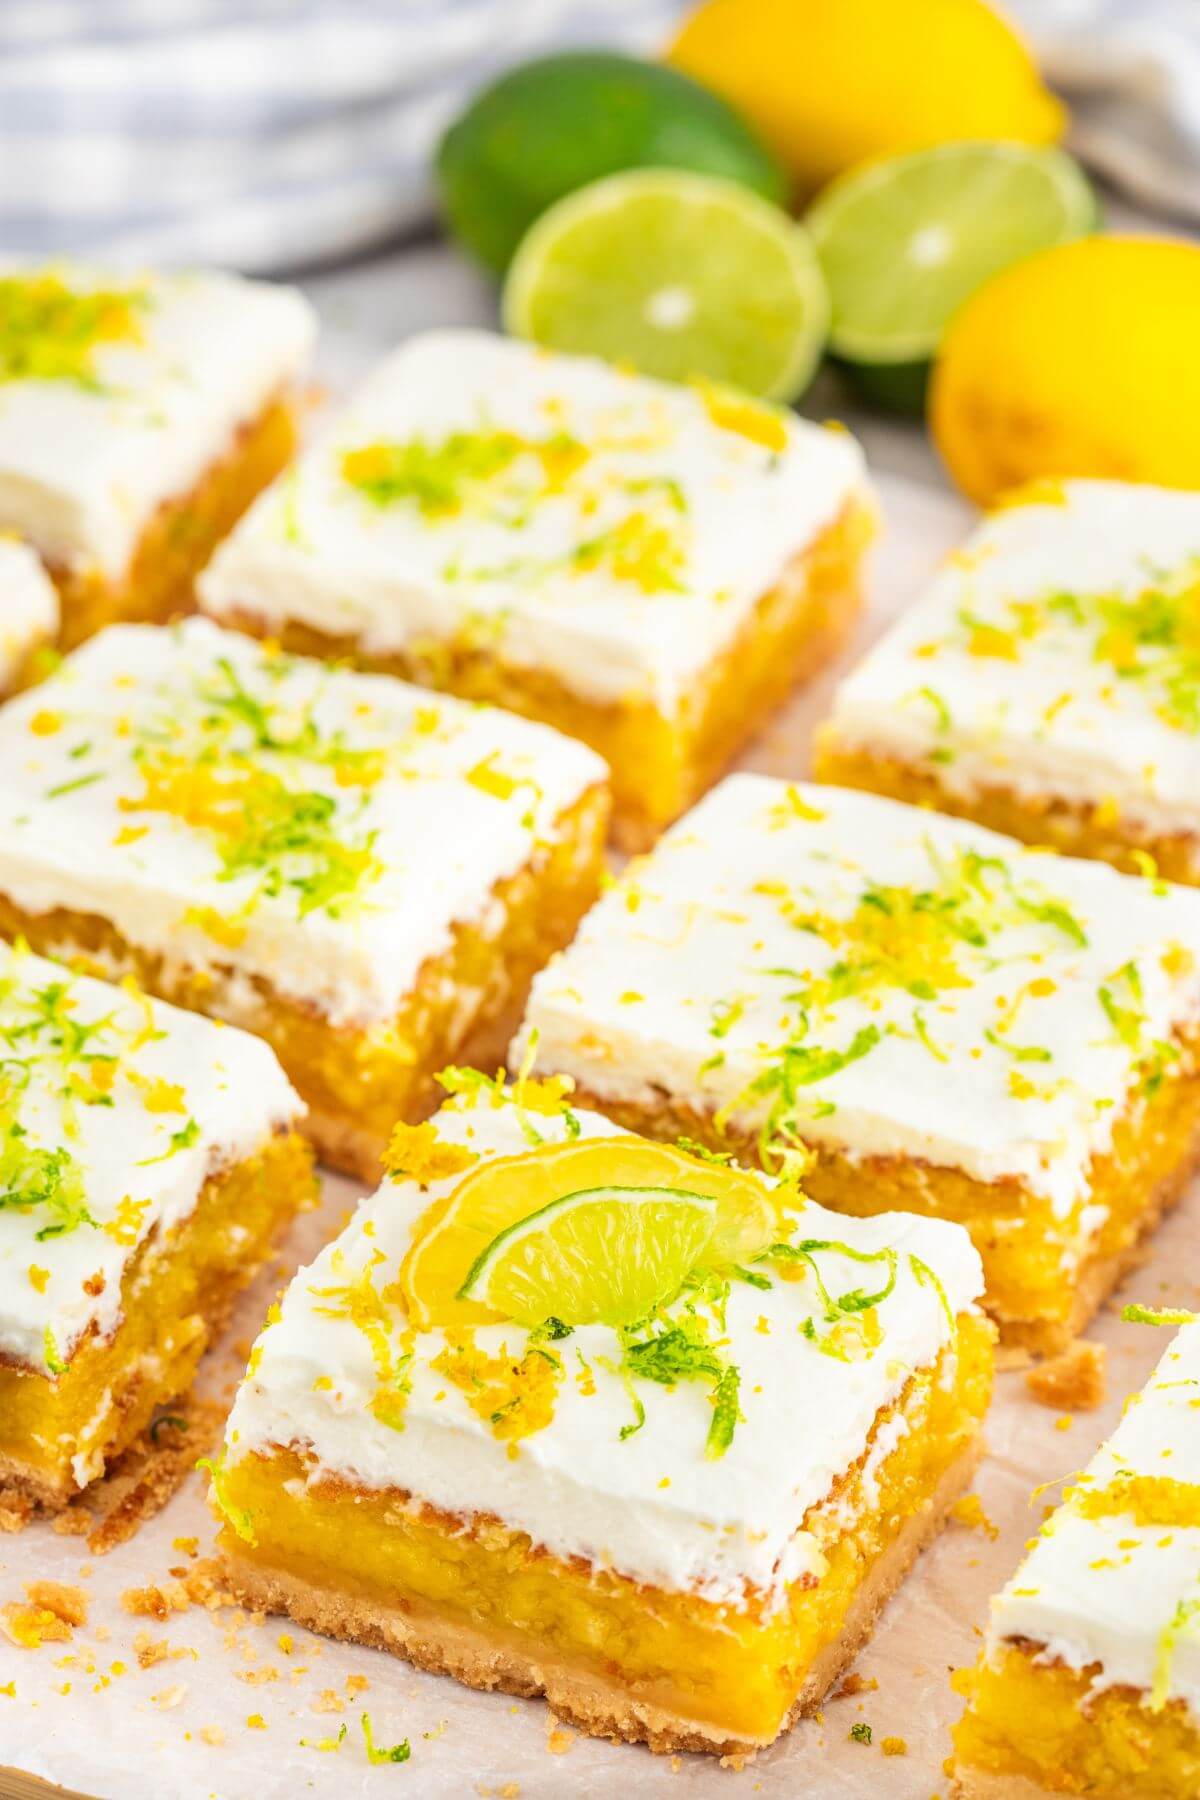 Neat rows of lemon lime squares rest in front of whole, fresh citrus fruits.